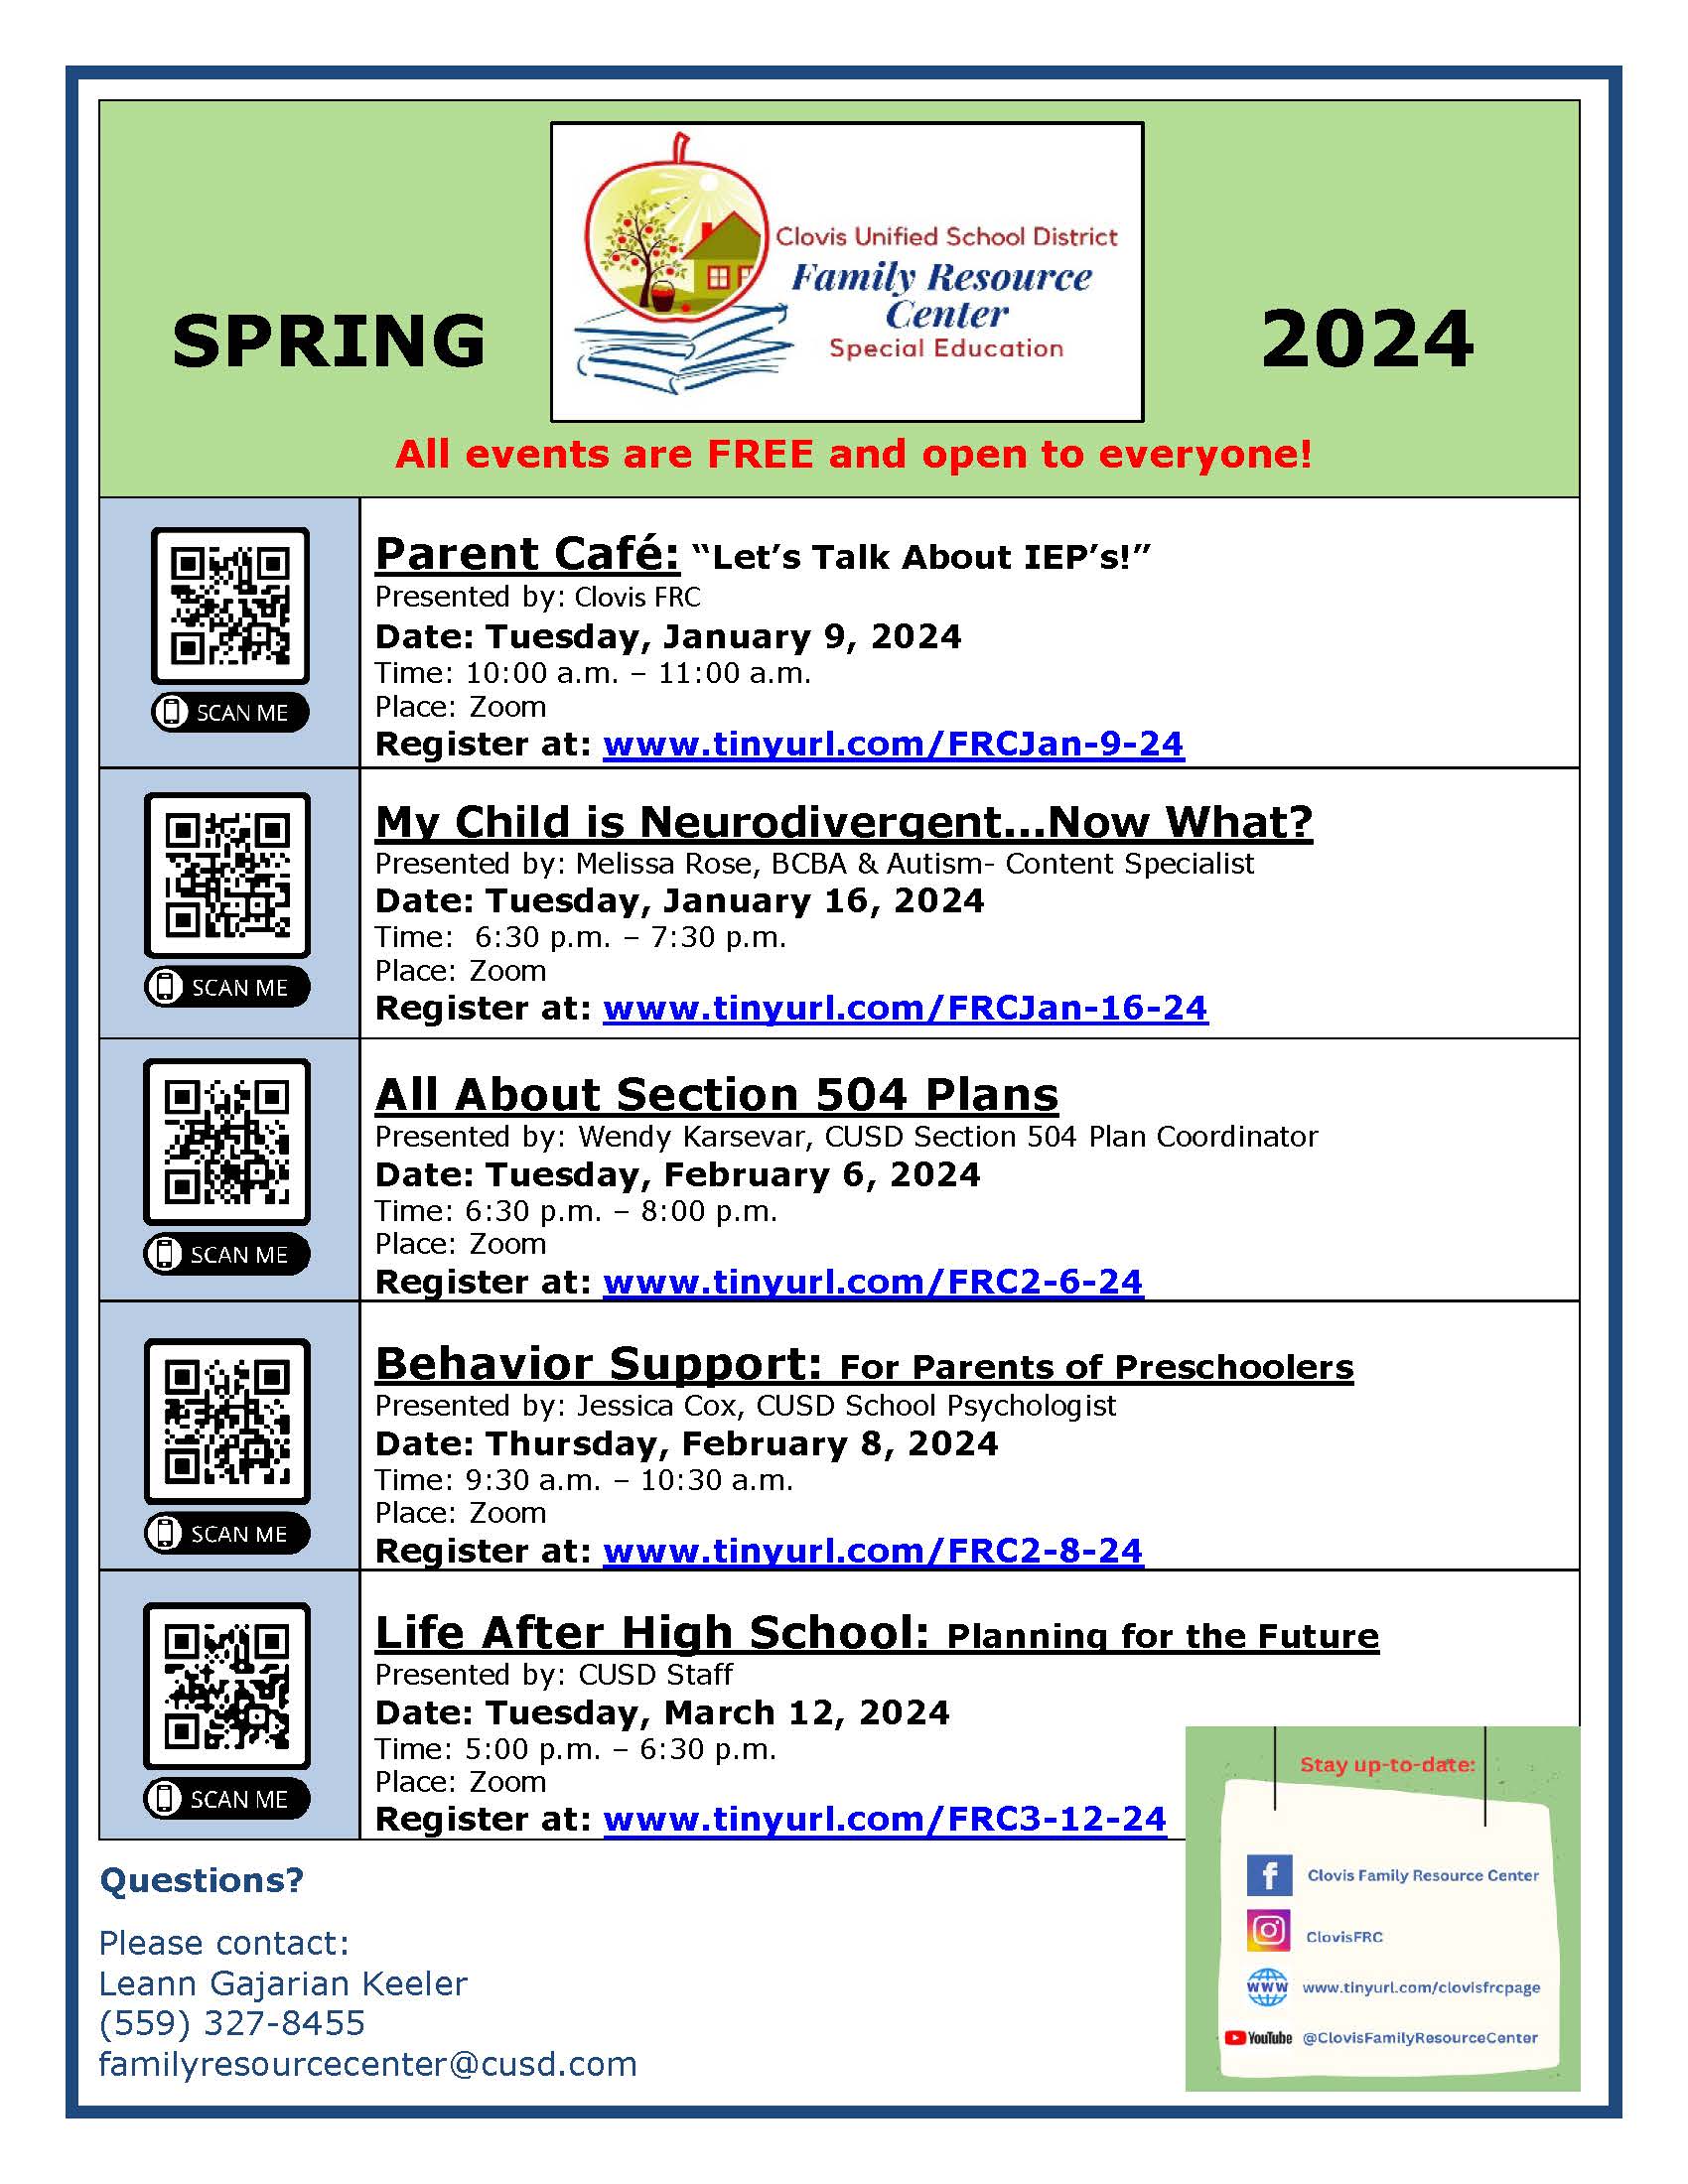 Image of Springl 2024 FRC events calendar. RTF version available for download on this page.